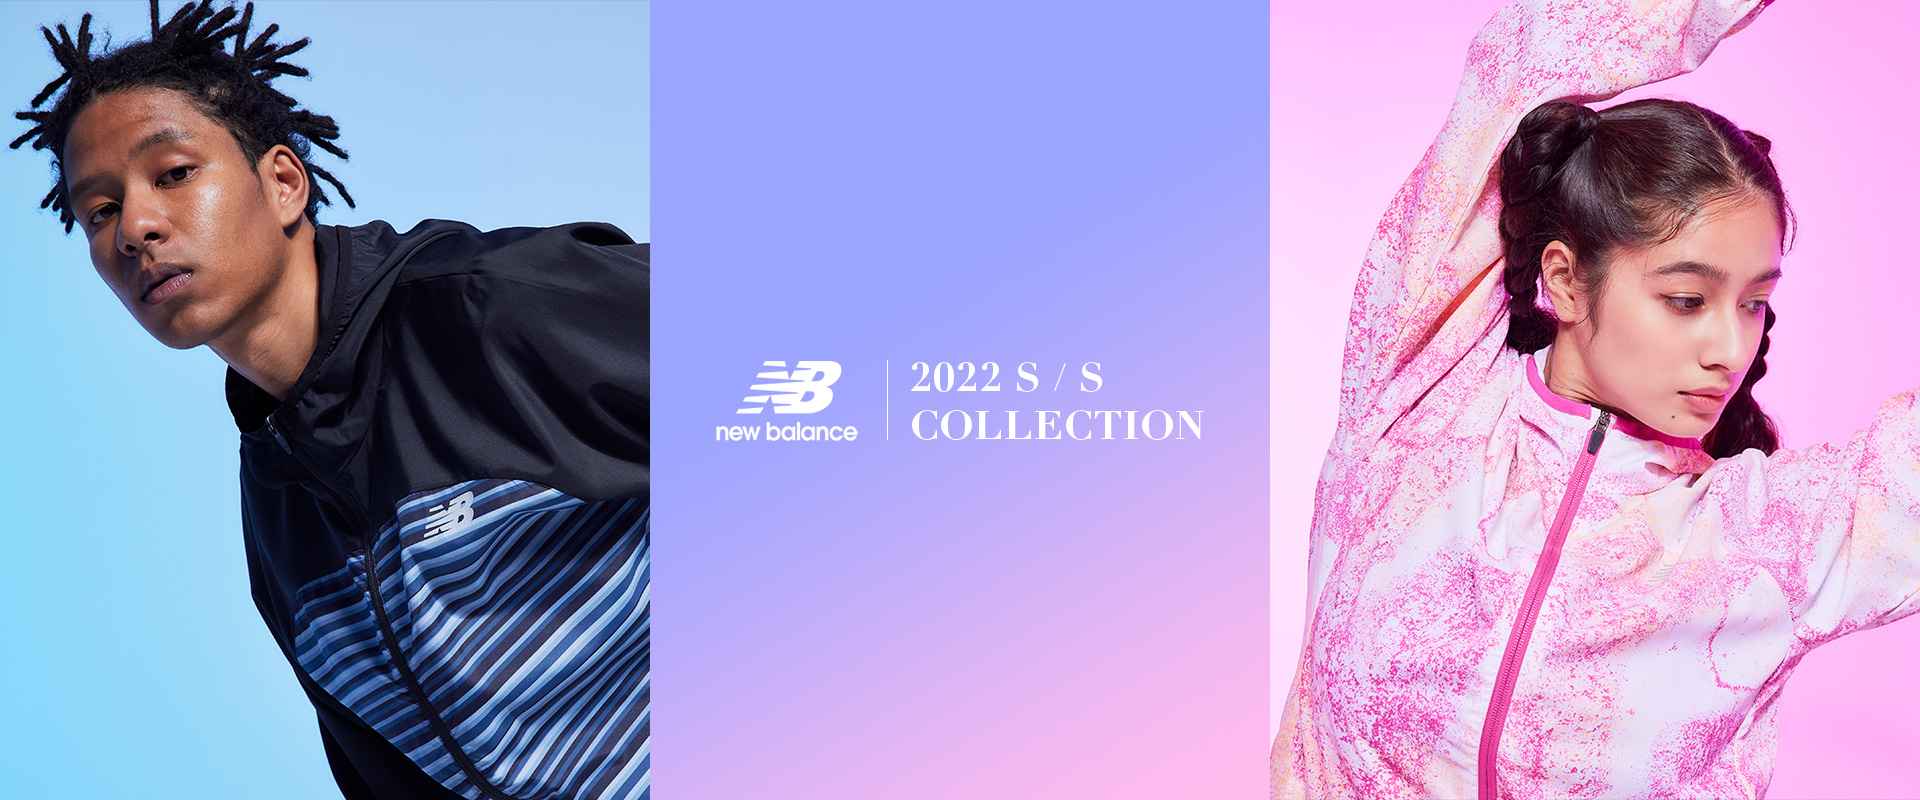 Running Style 2022 SS Collection